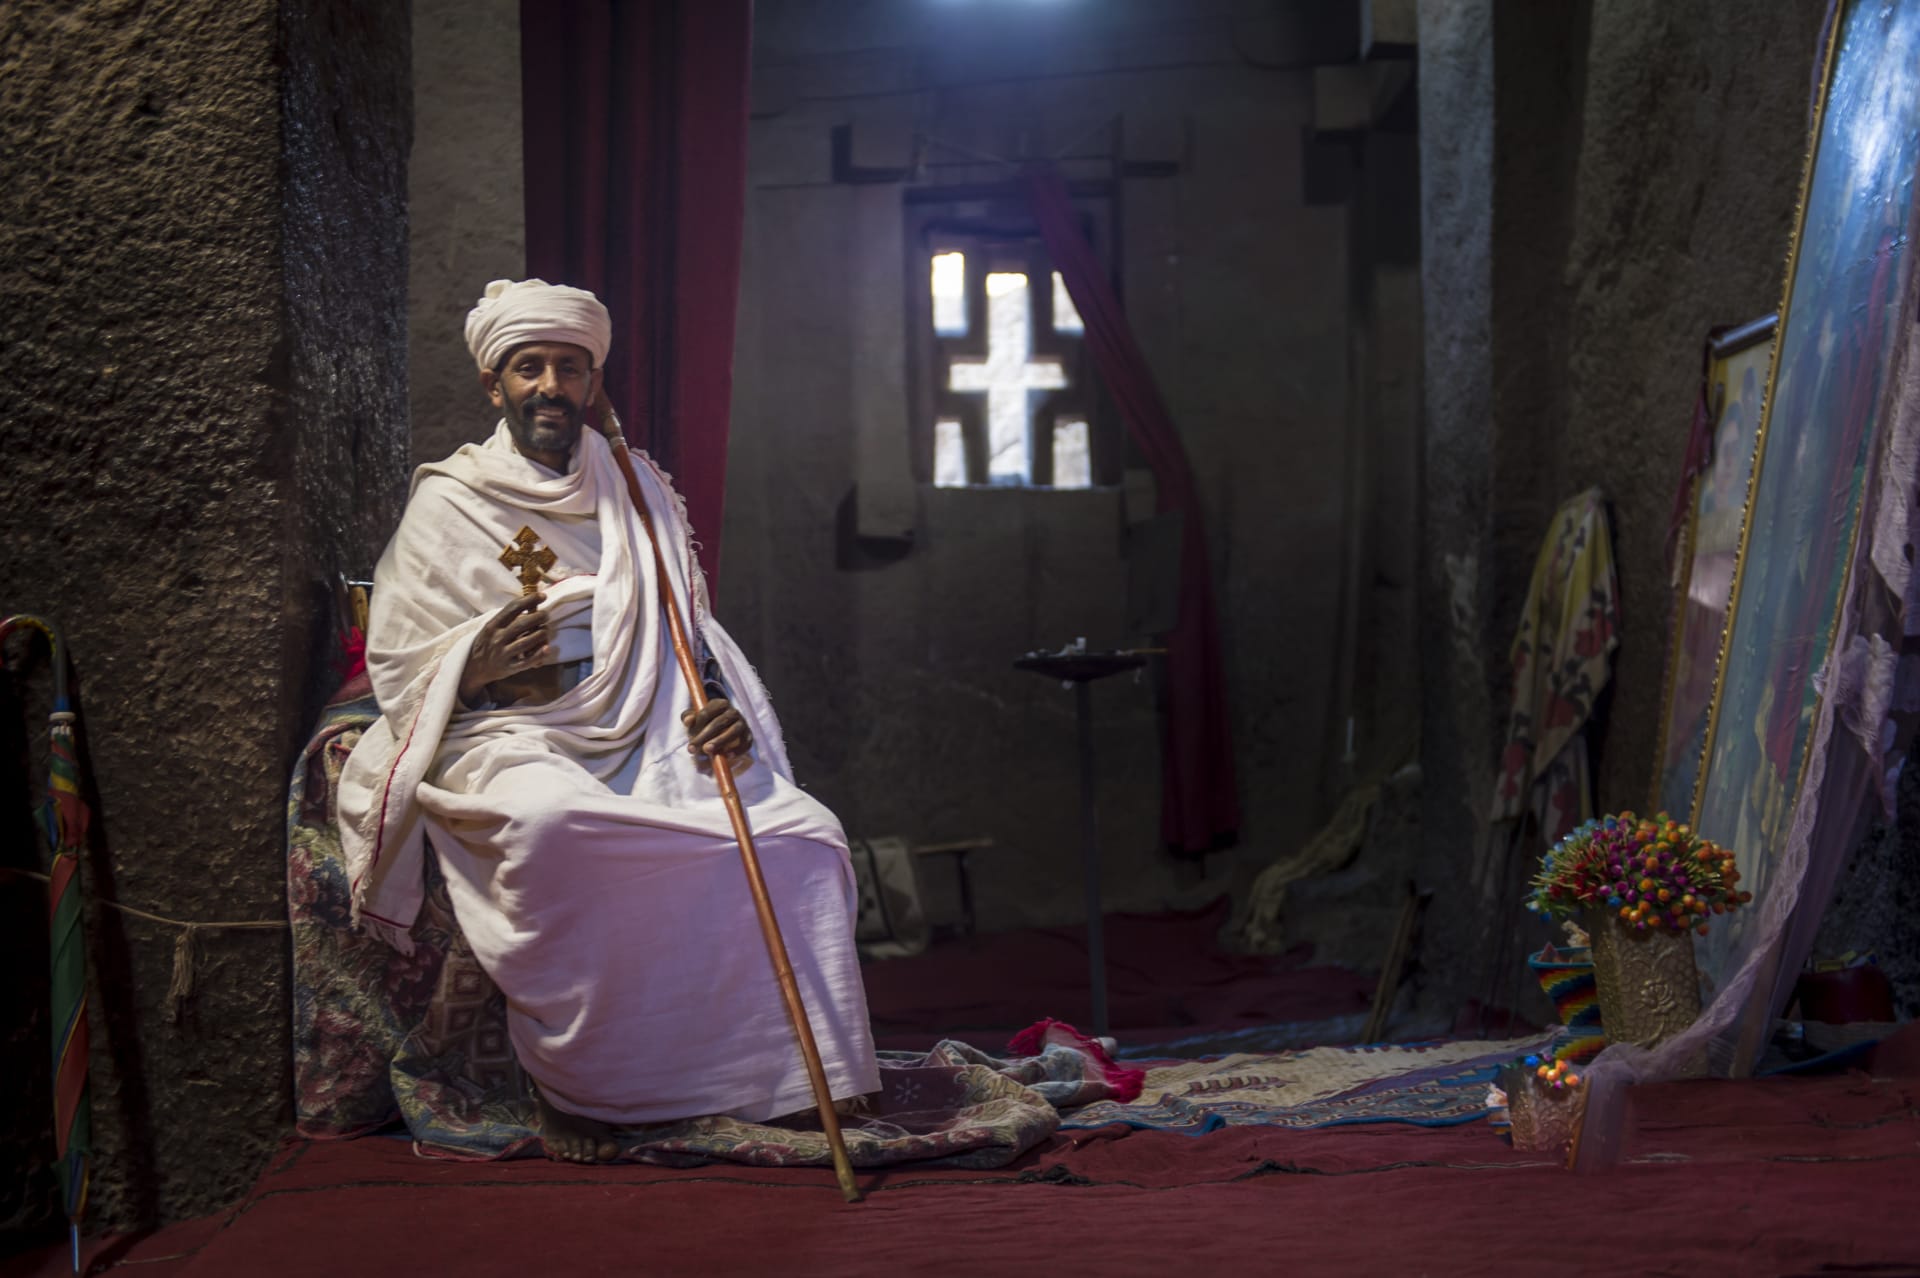 Ethiopian Orthodox Priest, adult male wearing a white robe sits by a collection of religious icons inside The Church of Saint George, one of many monolithic rock-cut churches hewn into the rocky hills of Lalibela, Ethiopia.